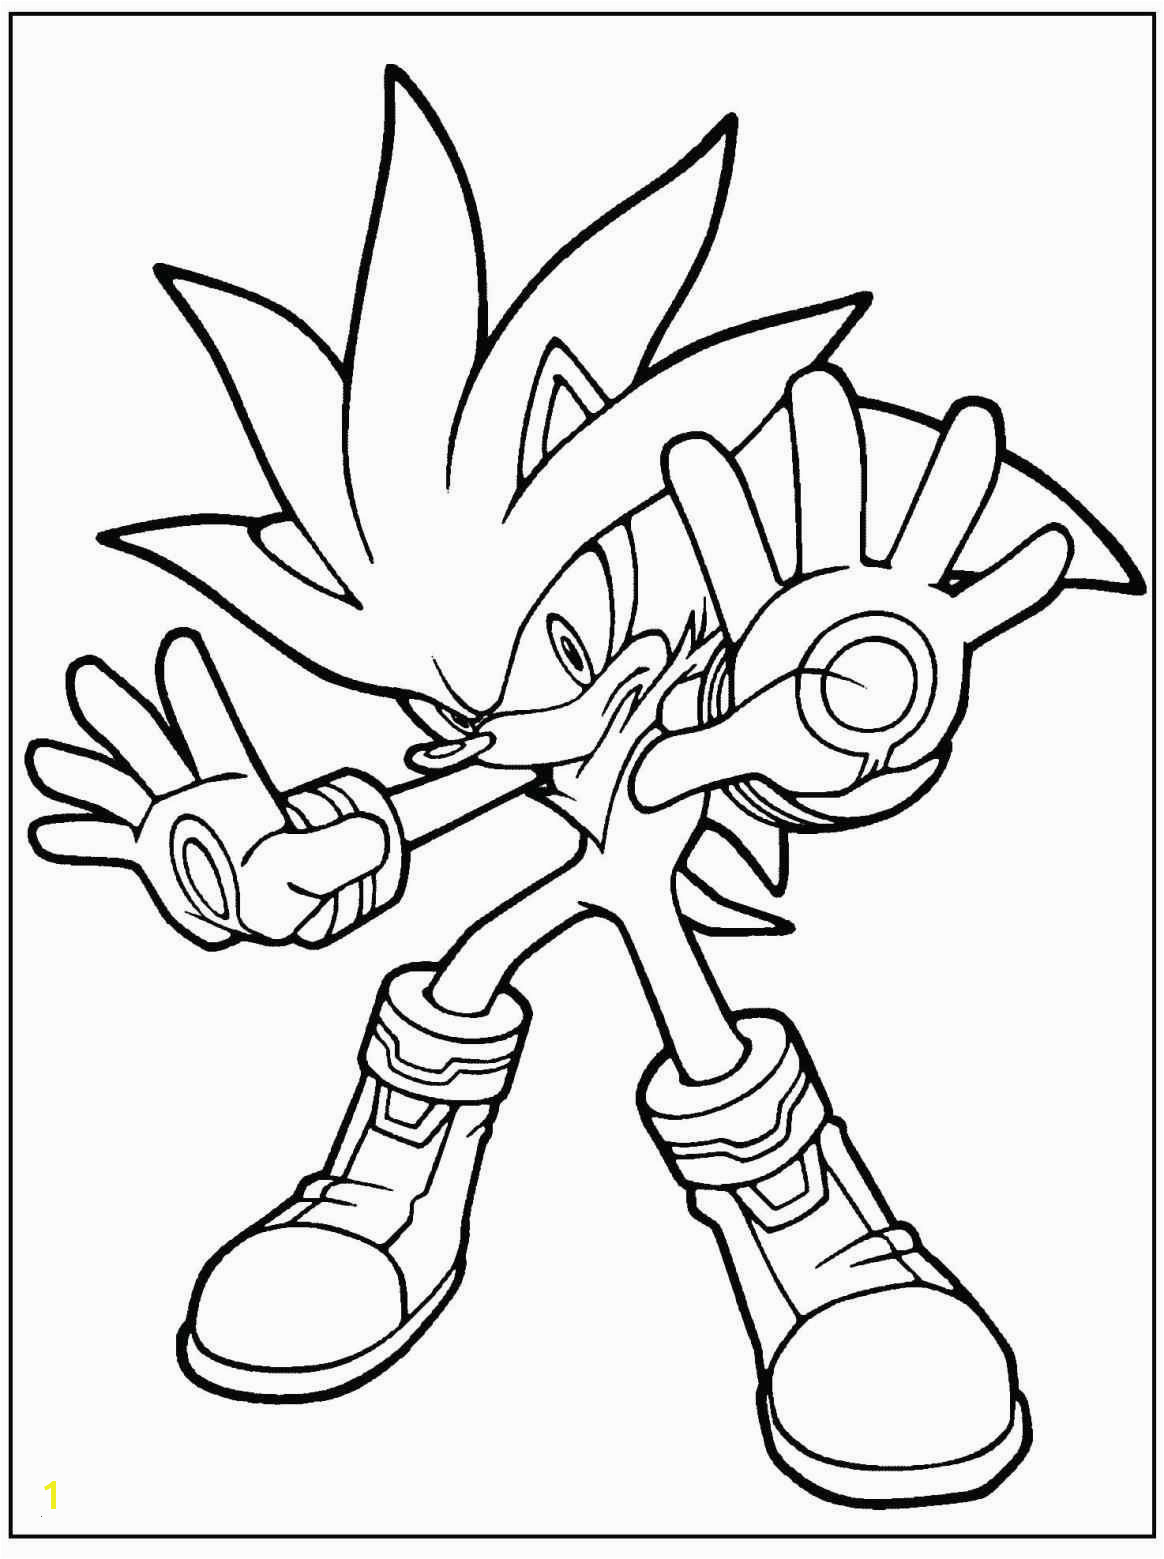 Sonic Blaze Coloring Pages Ausmalbilder Blaze Inspirierend sonic Boom Knuckles Coloring Pages